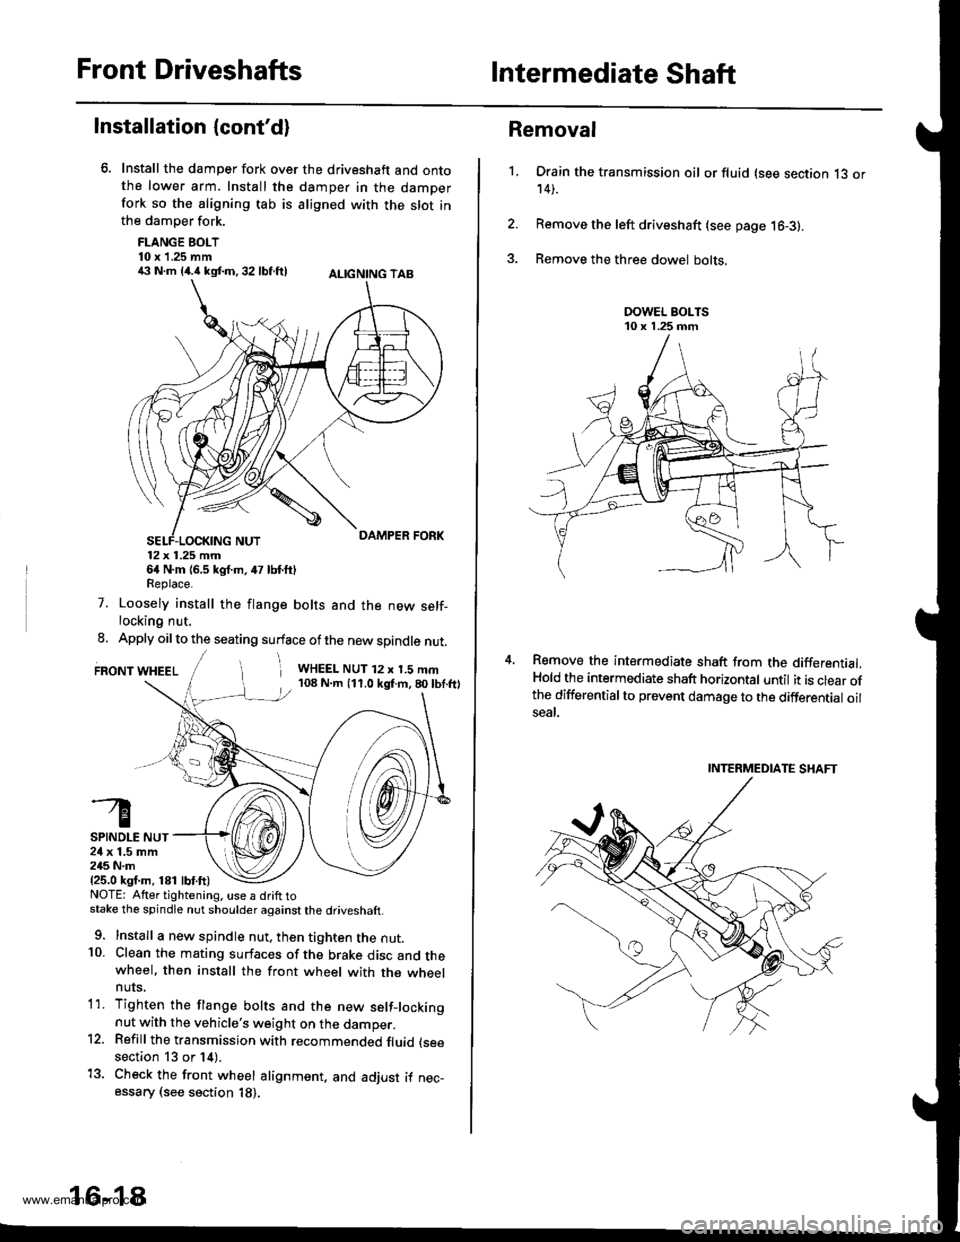 HONDA CR-V 1998 RD1-RD3 / 1.G Repair Manual 
Front DriveshaftsIntermediate Shaft
Installation {contd}
Install the damper fork over the driveshaft and ontothe lower arm. Install the damper in the damperfork so the aligning tab is aligned with t